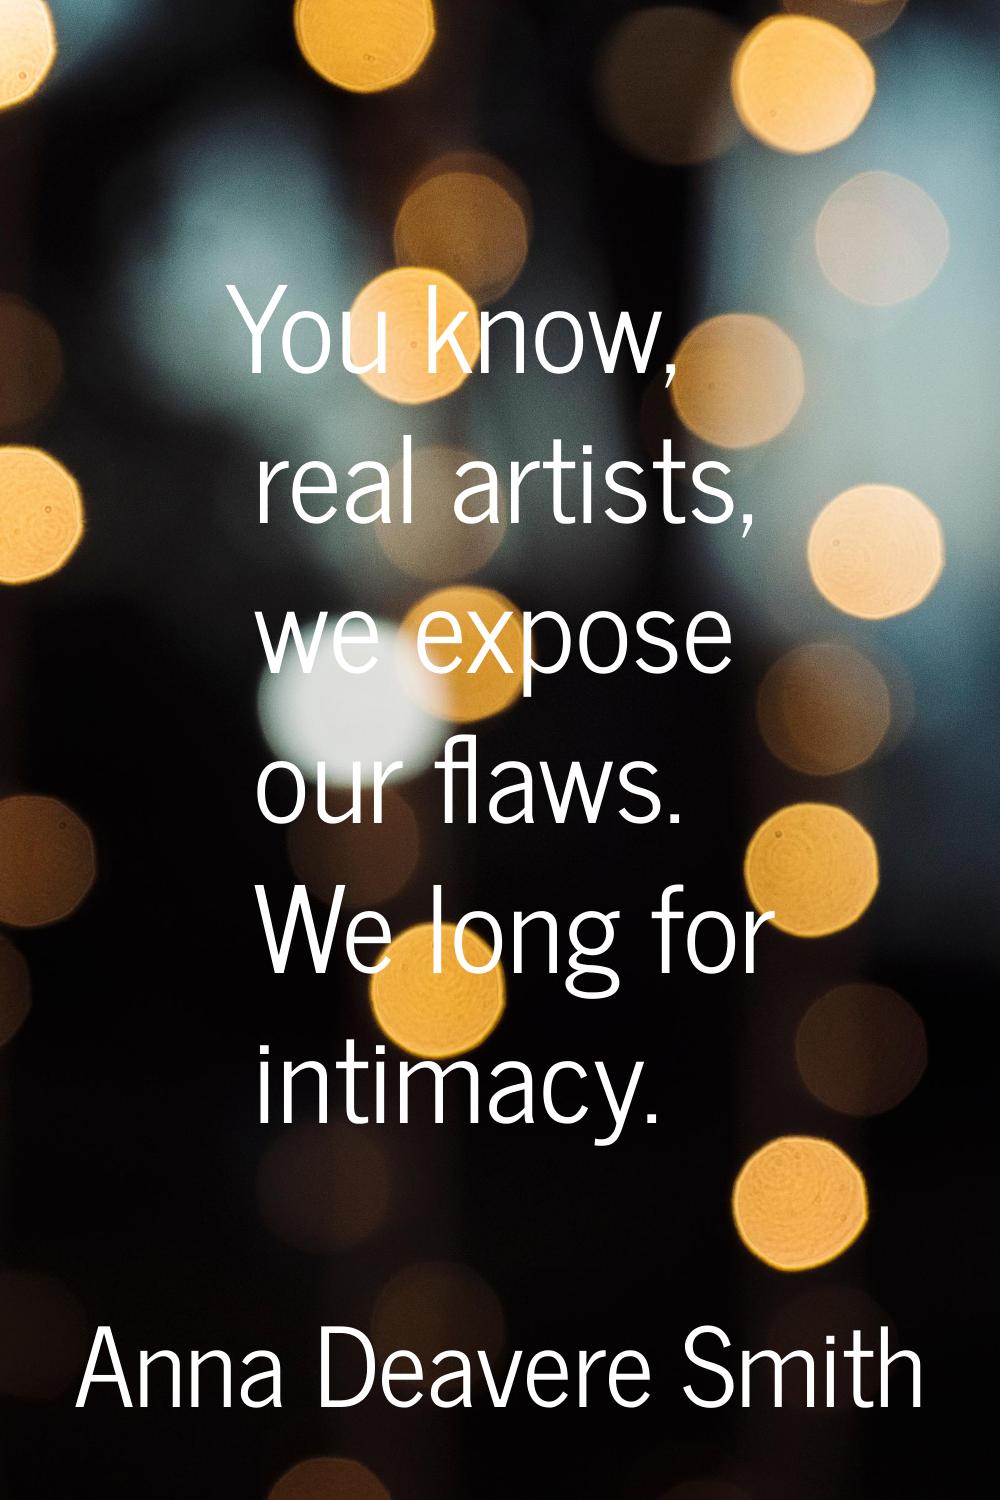 You know, real artists, we expose our flaws. We long for intimacy.